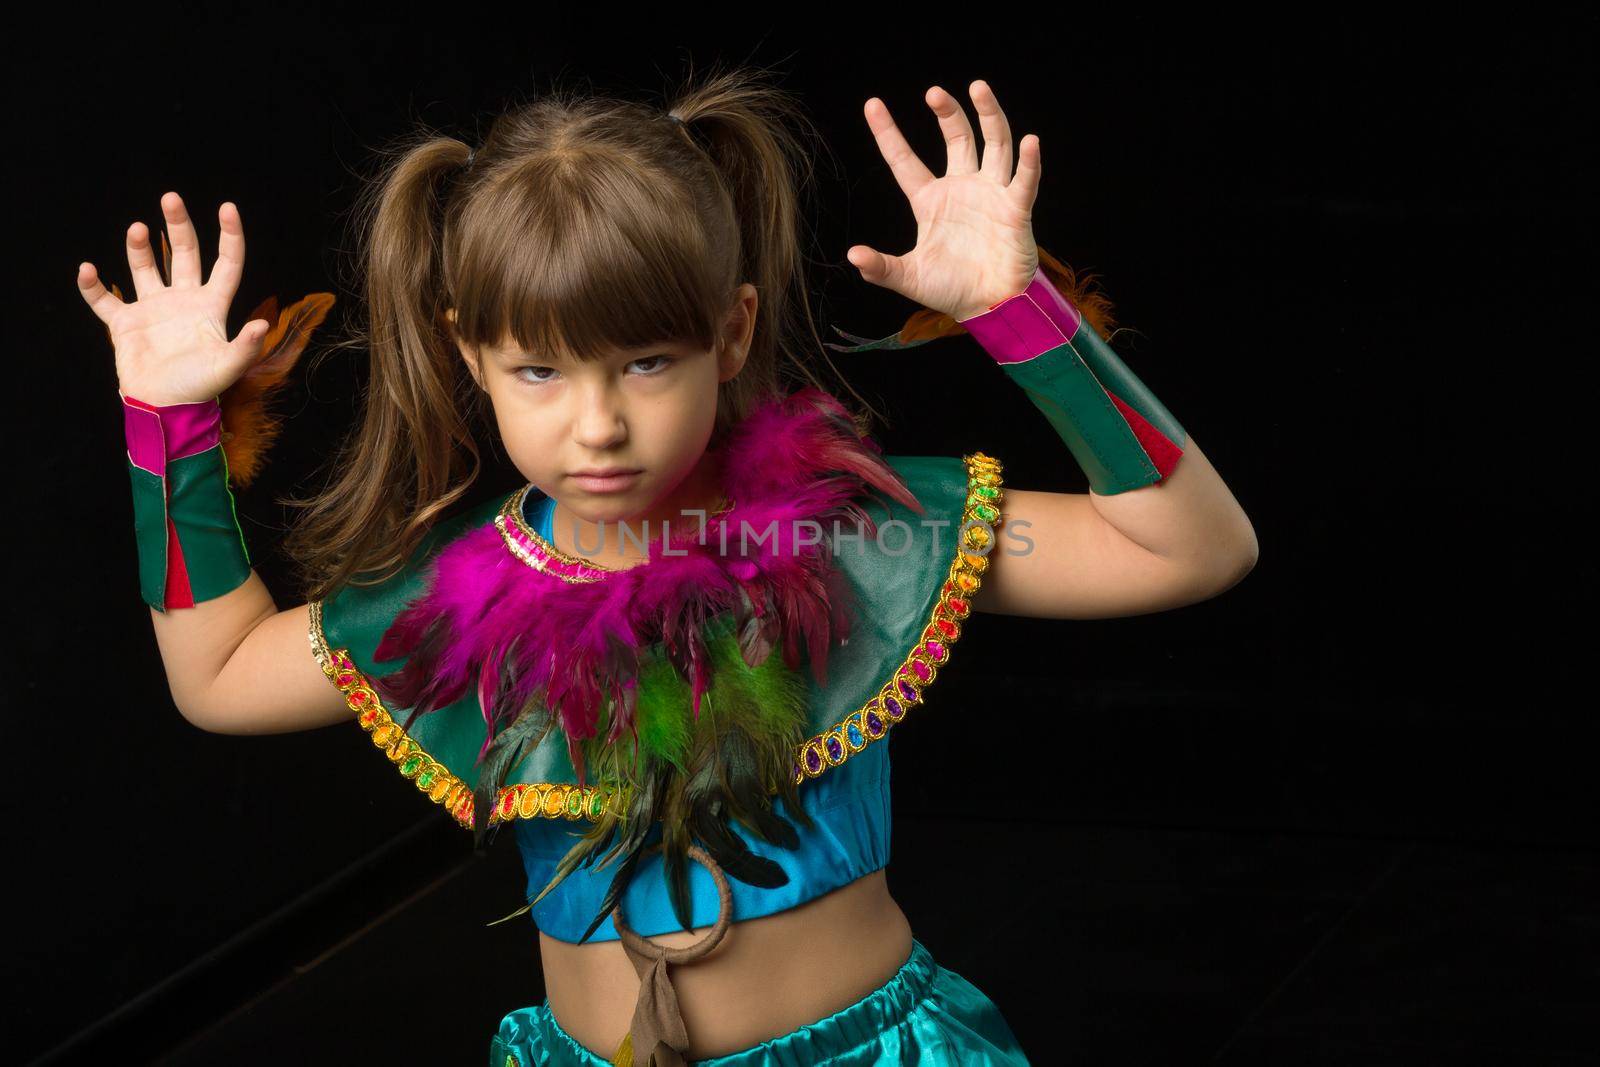 Girl growling like animal, making cat claws gesture. Portrait of beautiful preteen girl dressed ethnic costume standing on black background. Emotional child raising hands like paws posing in studio